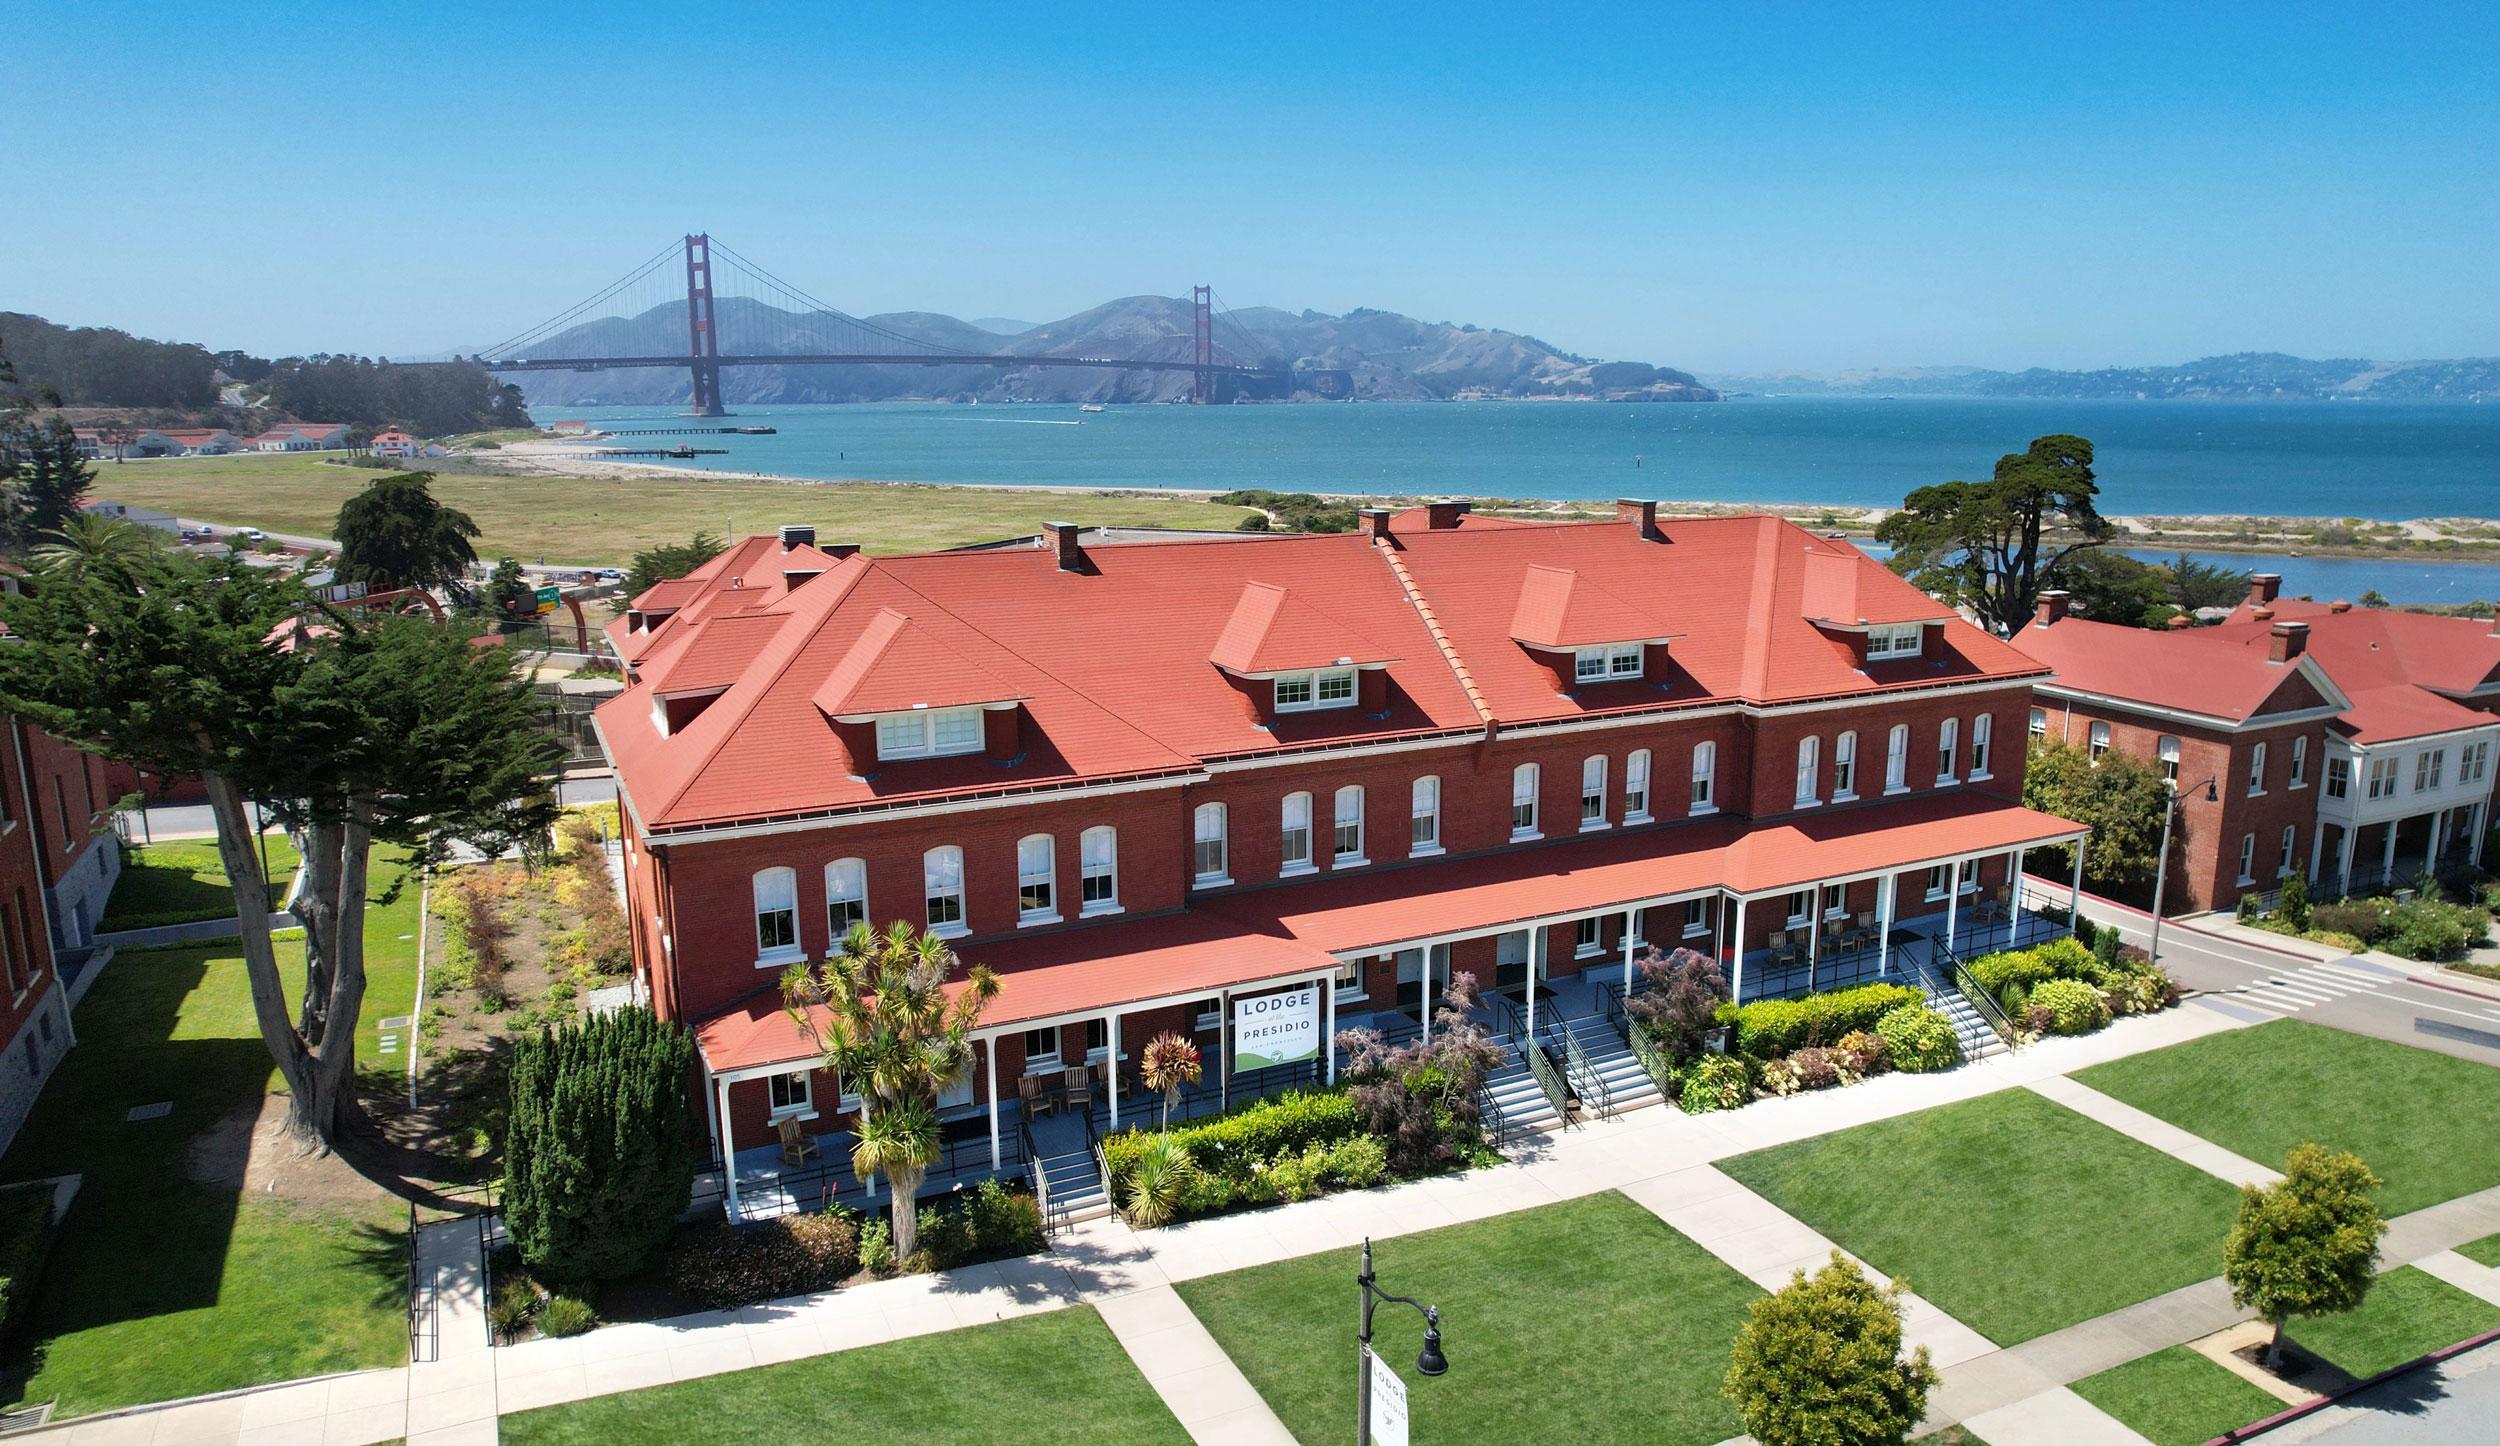 Aerial view of the Lodge at the Presidio with Golden Gate Bridge